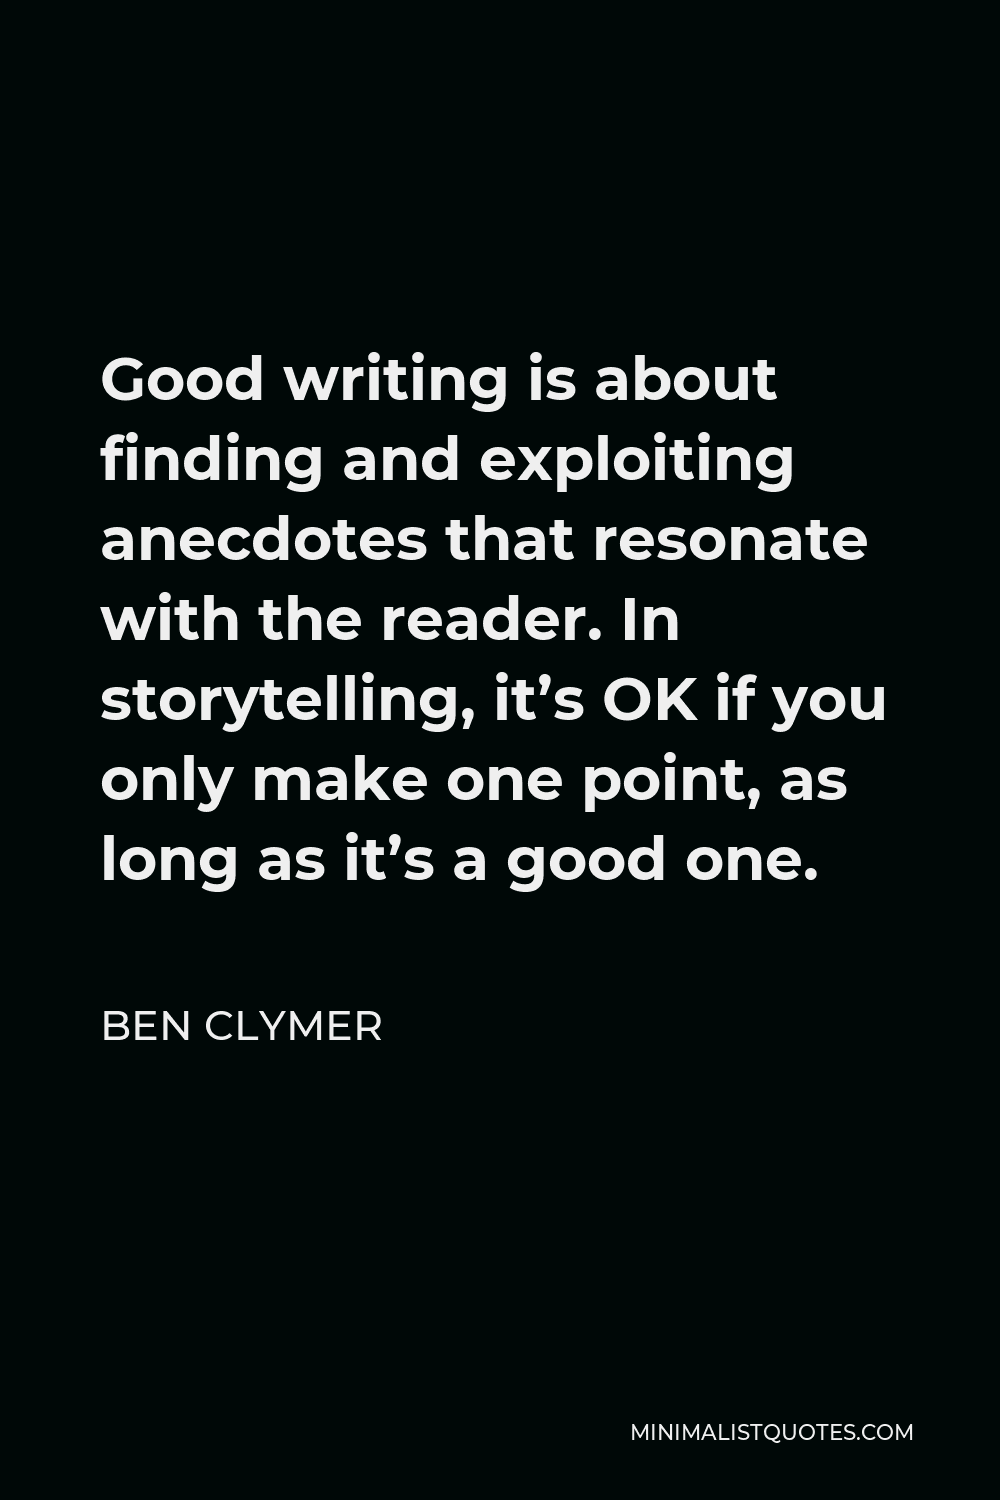 Ben Clymer Quote - Good writing is about finding and exploiting anecdotes that resonate with the reader. In storytelling, it’s OK if you only make one point, as long as it’s a good one.